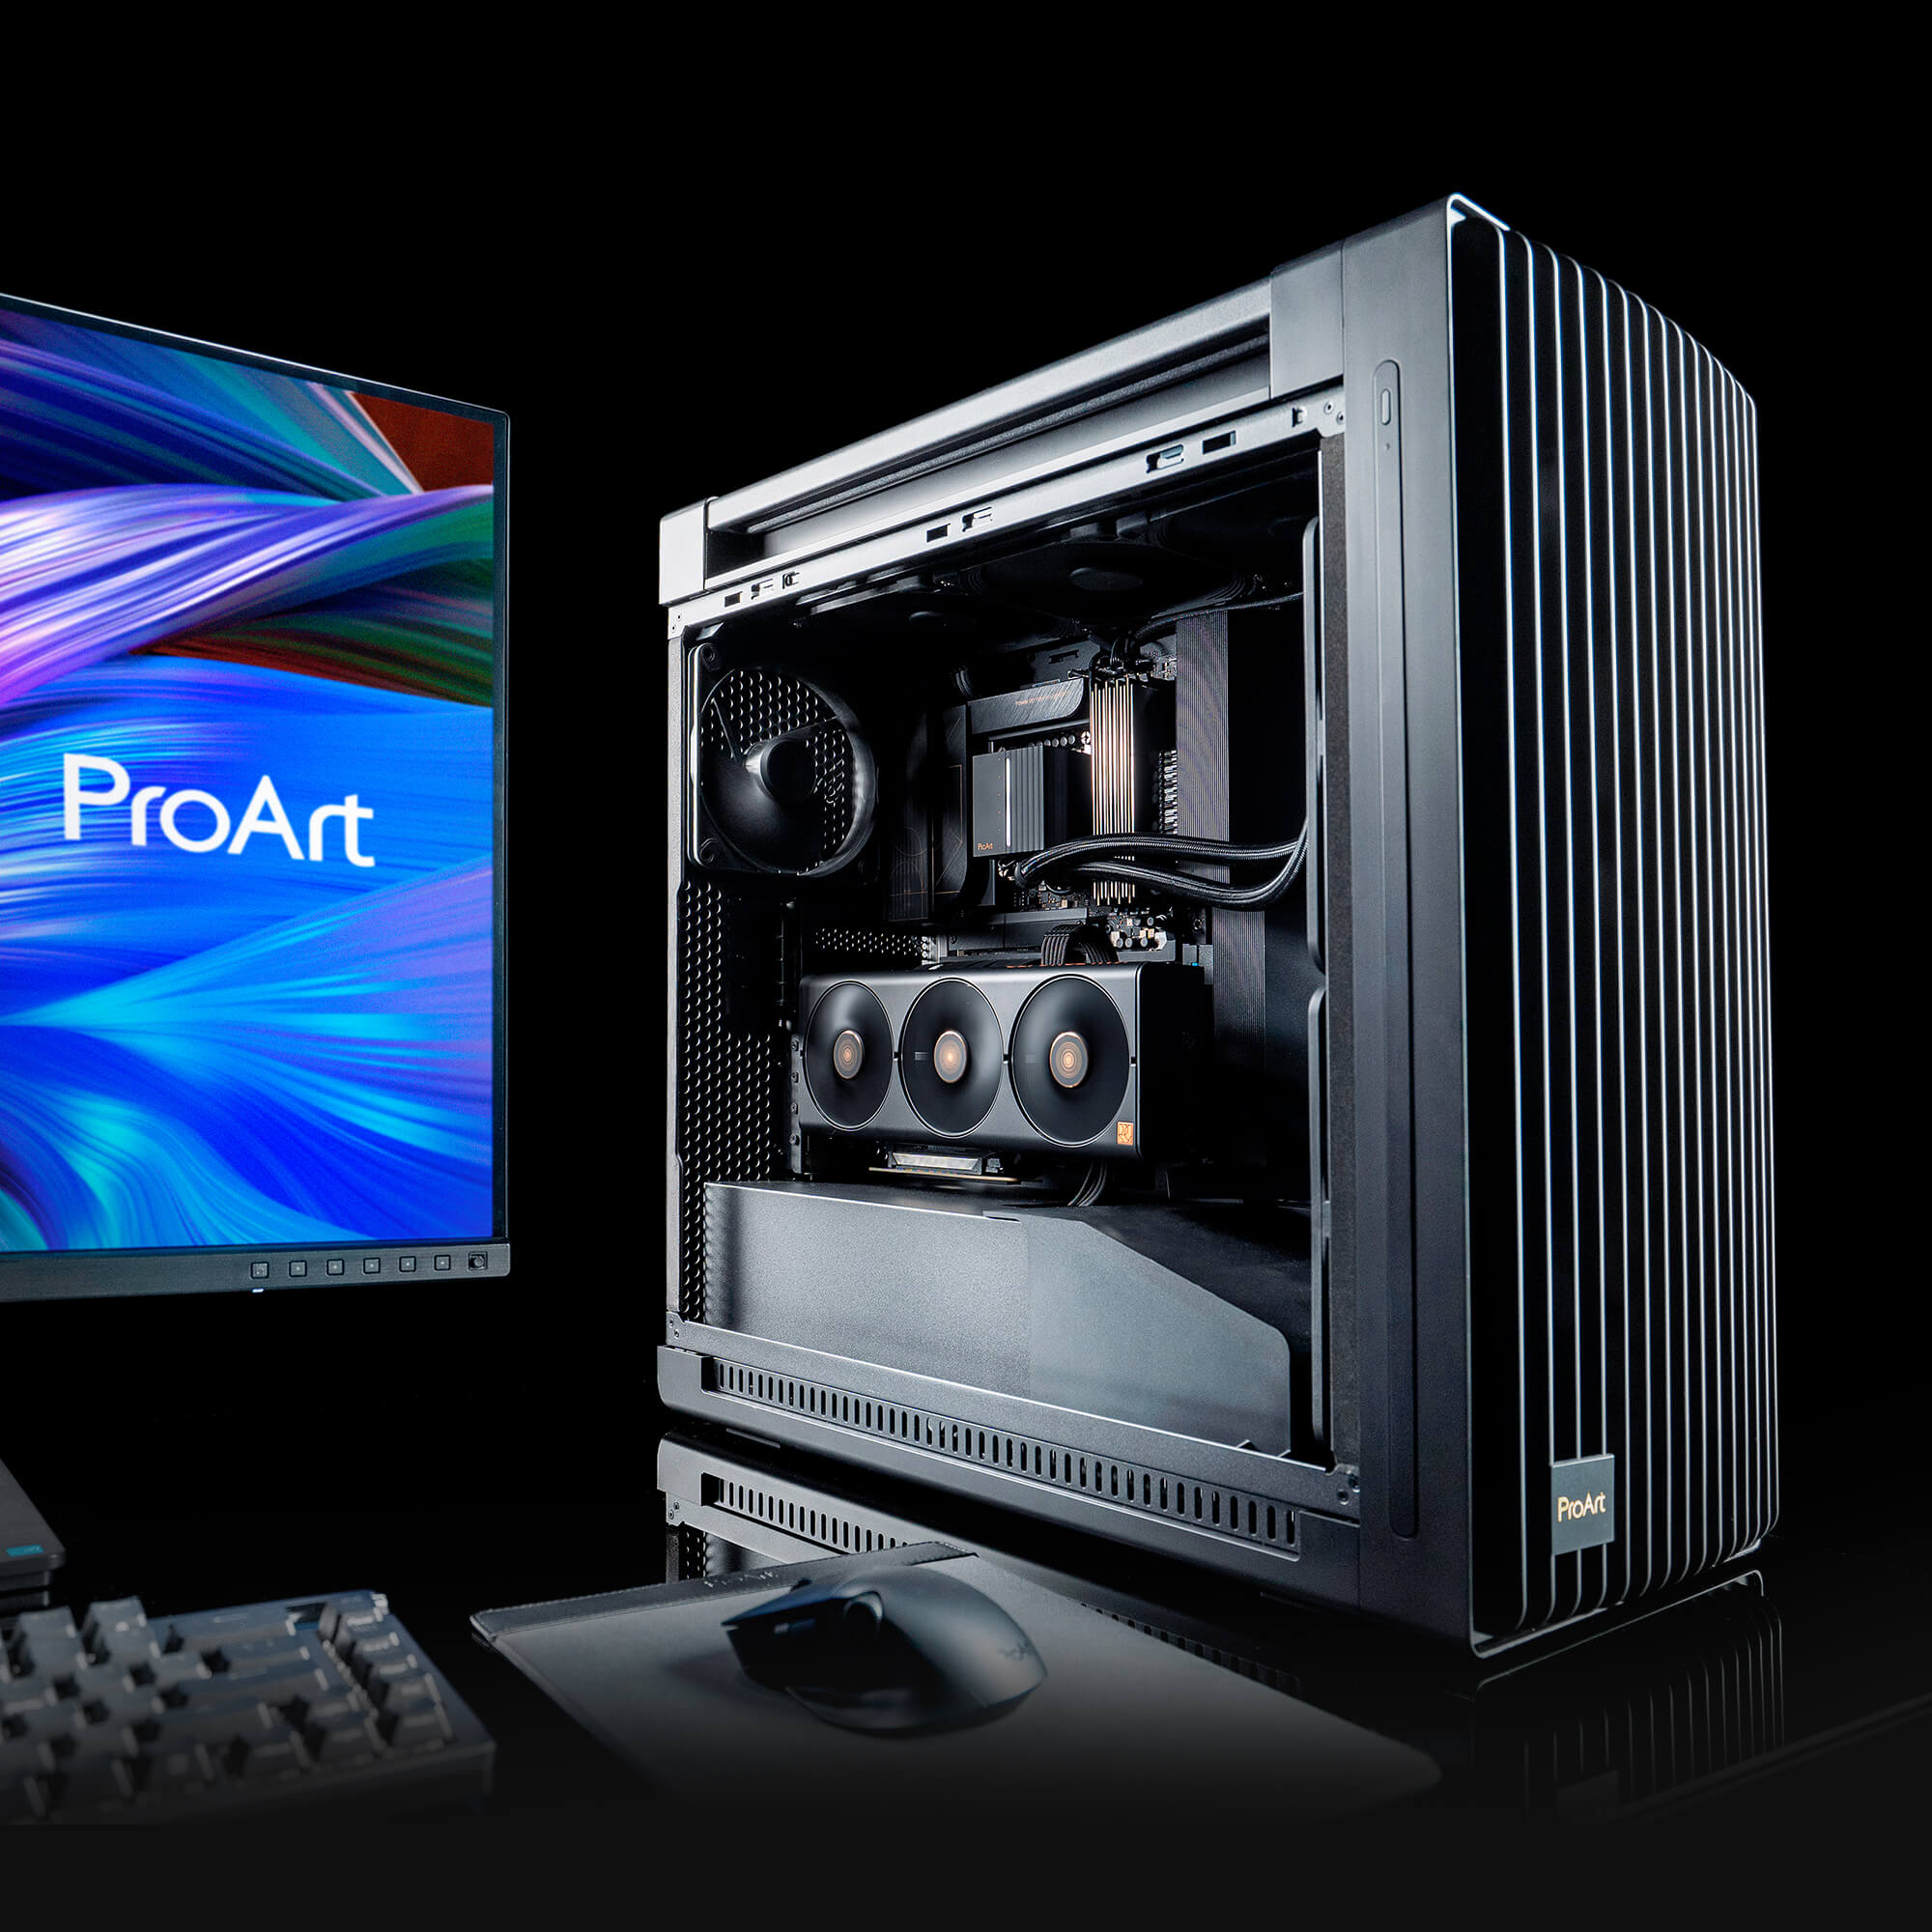 ProArt PA602 PC build with ProArt display, mouse, mouse pad and a keyboard